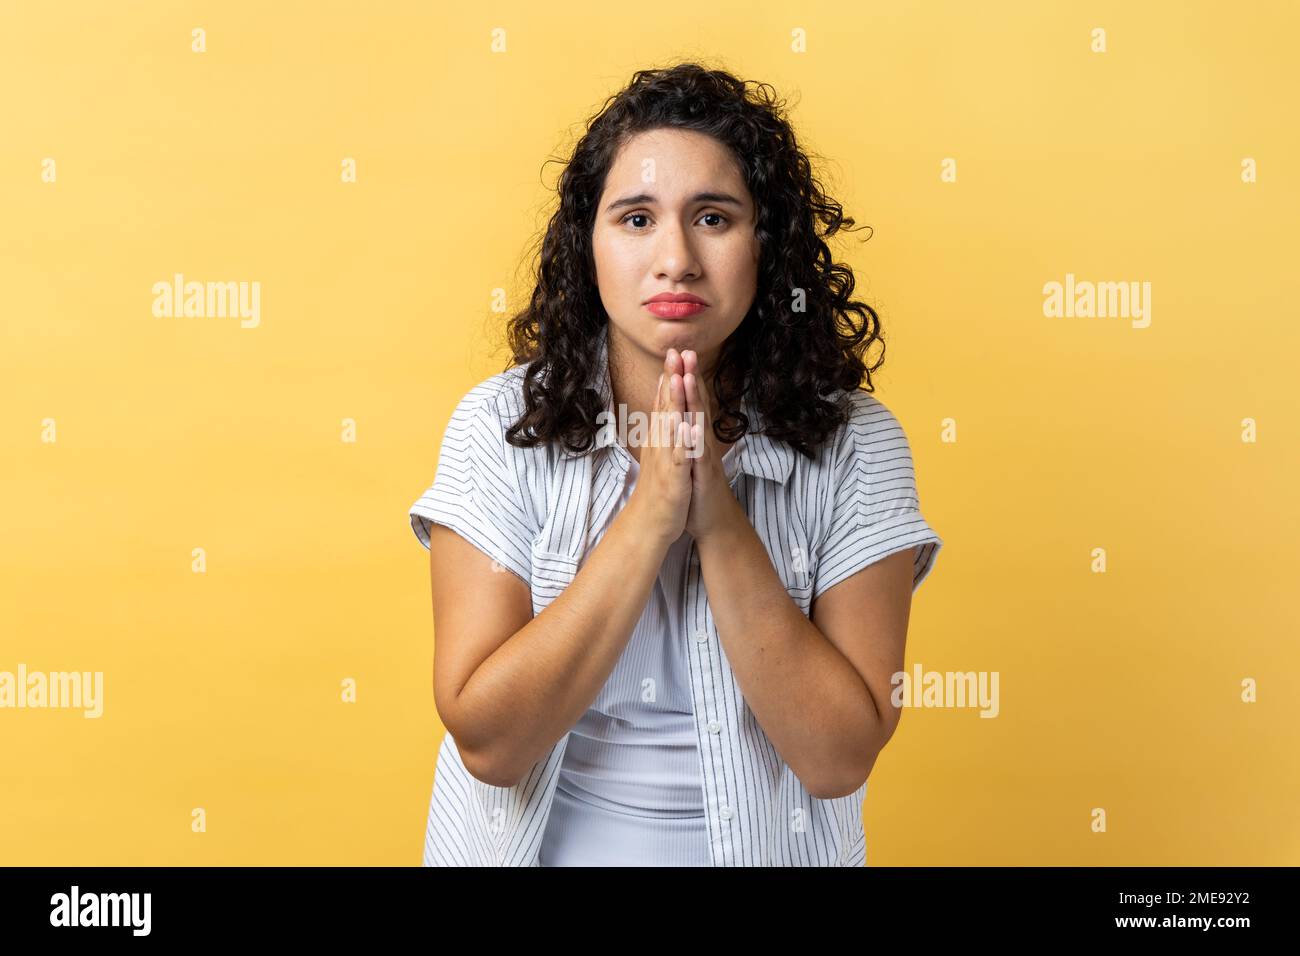 Portrait of woman with dark wavy hair holding hands in prayer, looking with imploring pleading expression, begging help, asking forgiveness. Indoor studio shot isolated on yellow background. Stock Photo